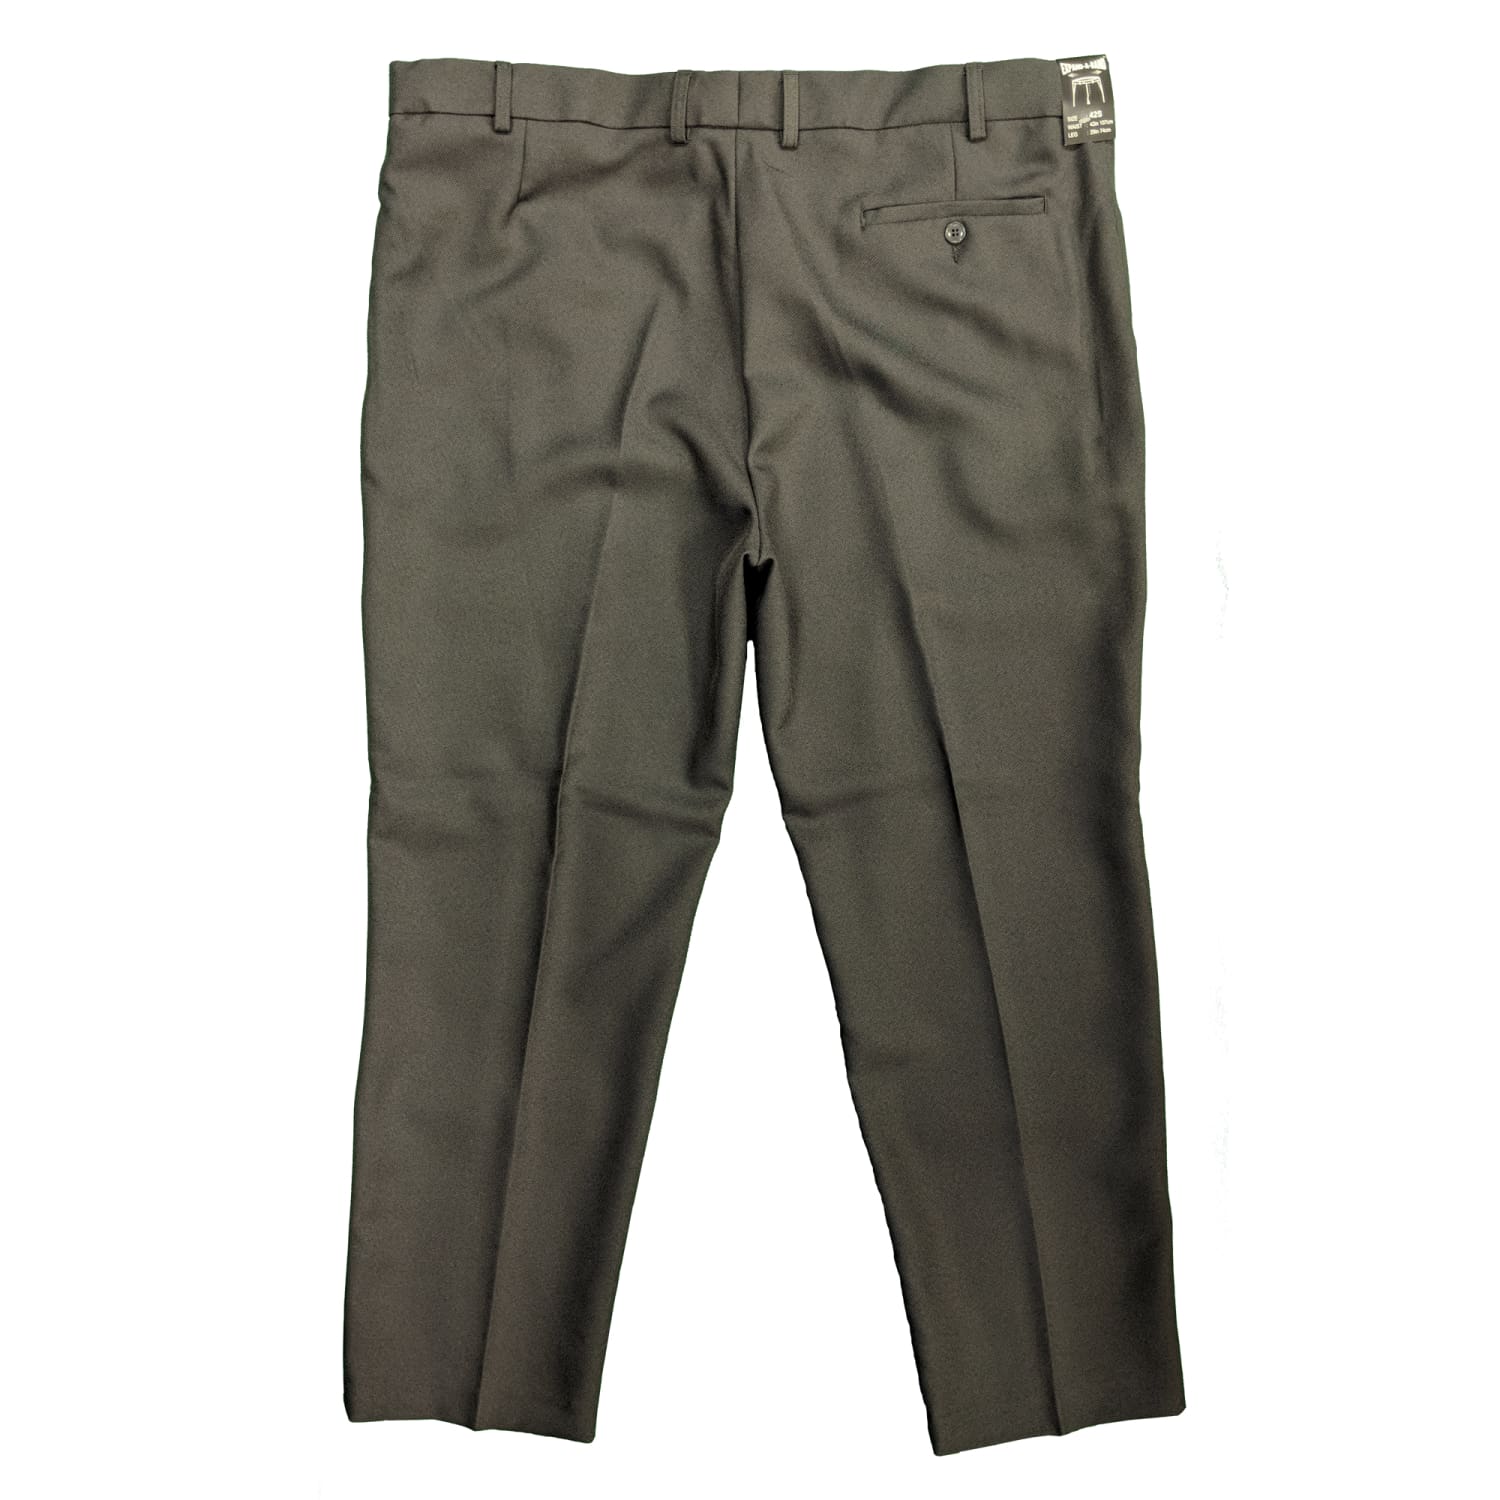 Carabou Trousers - GEP - Steel 1